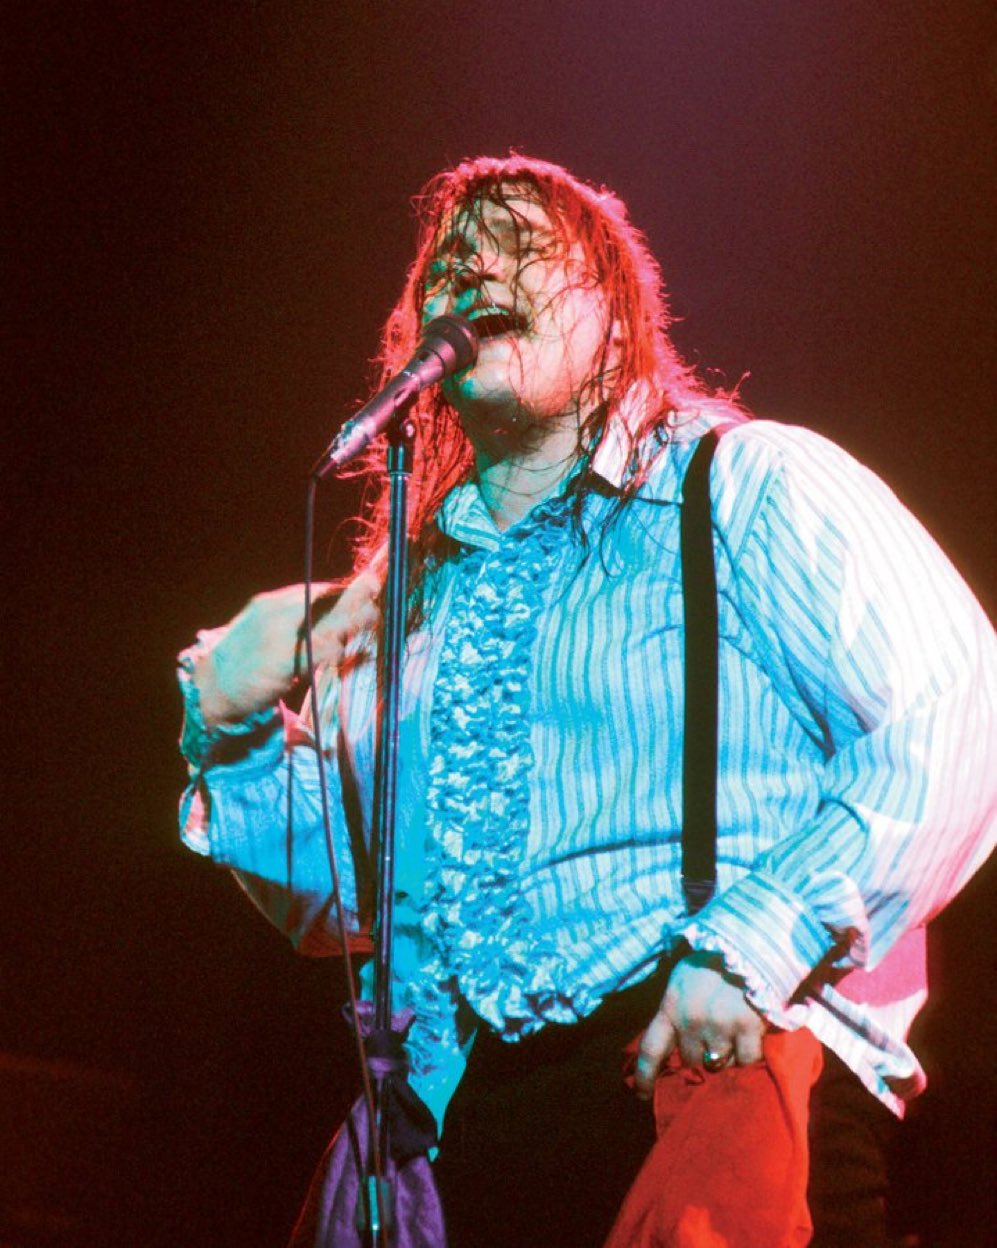 meat loaf died at aged 74